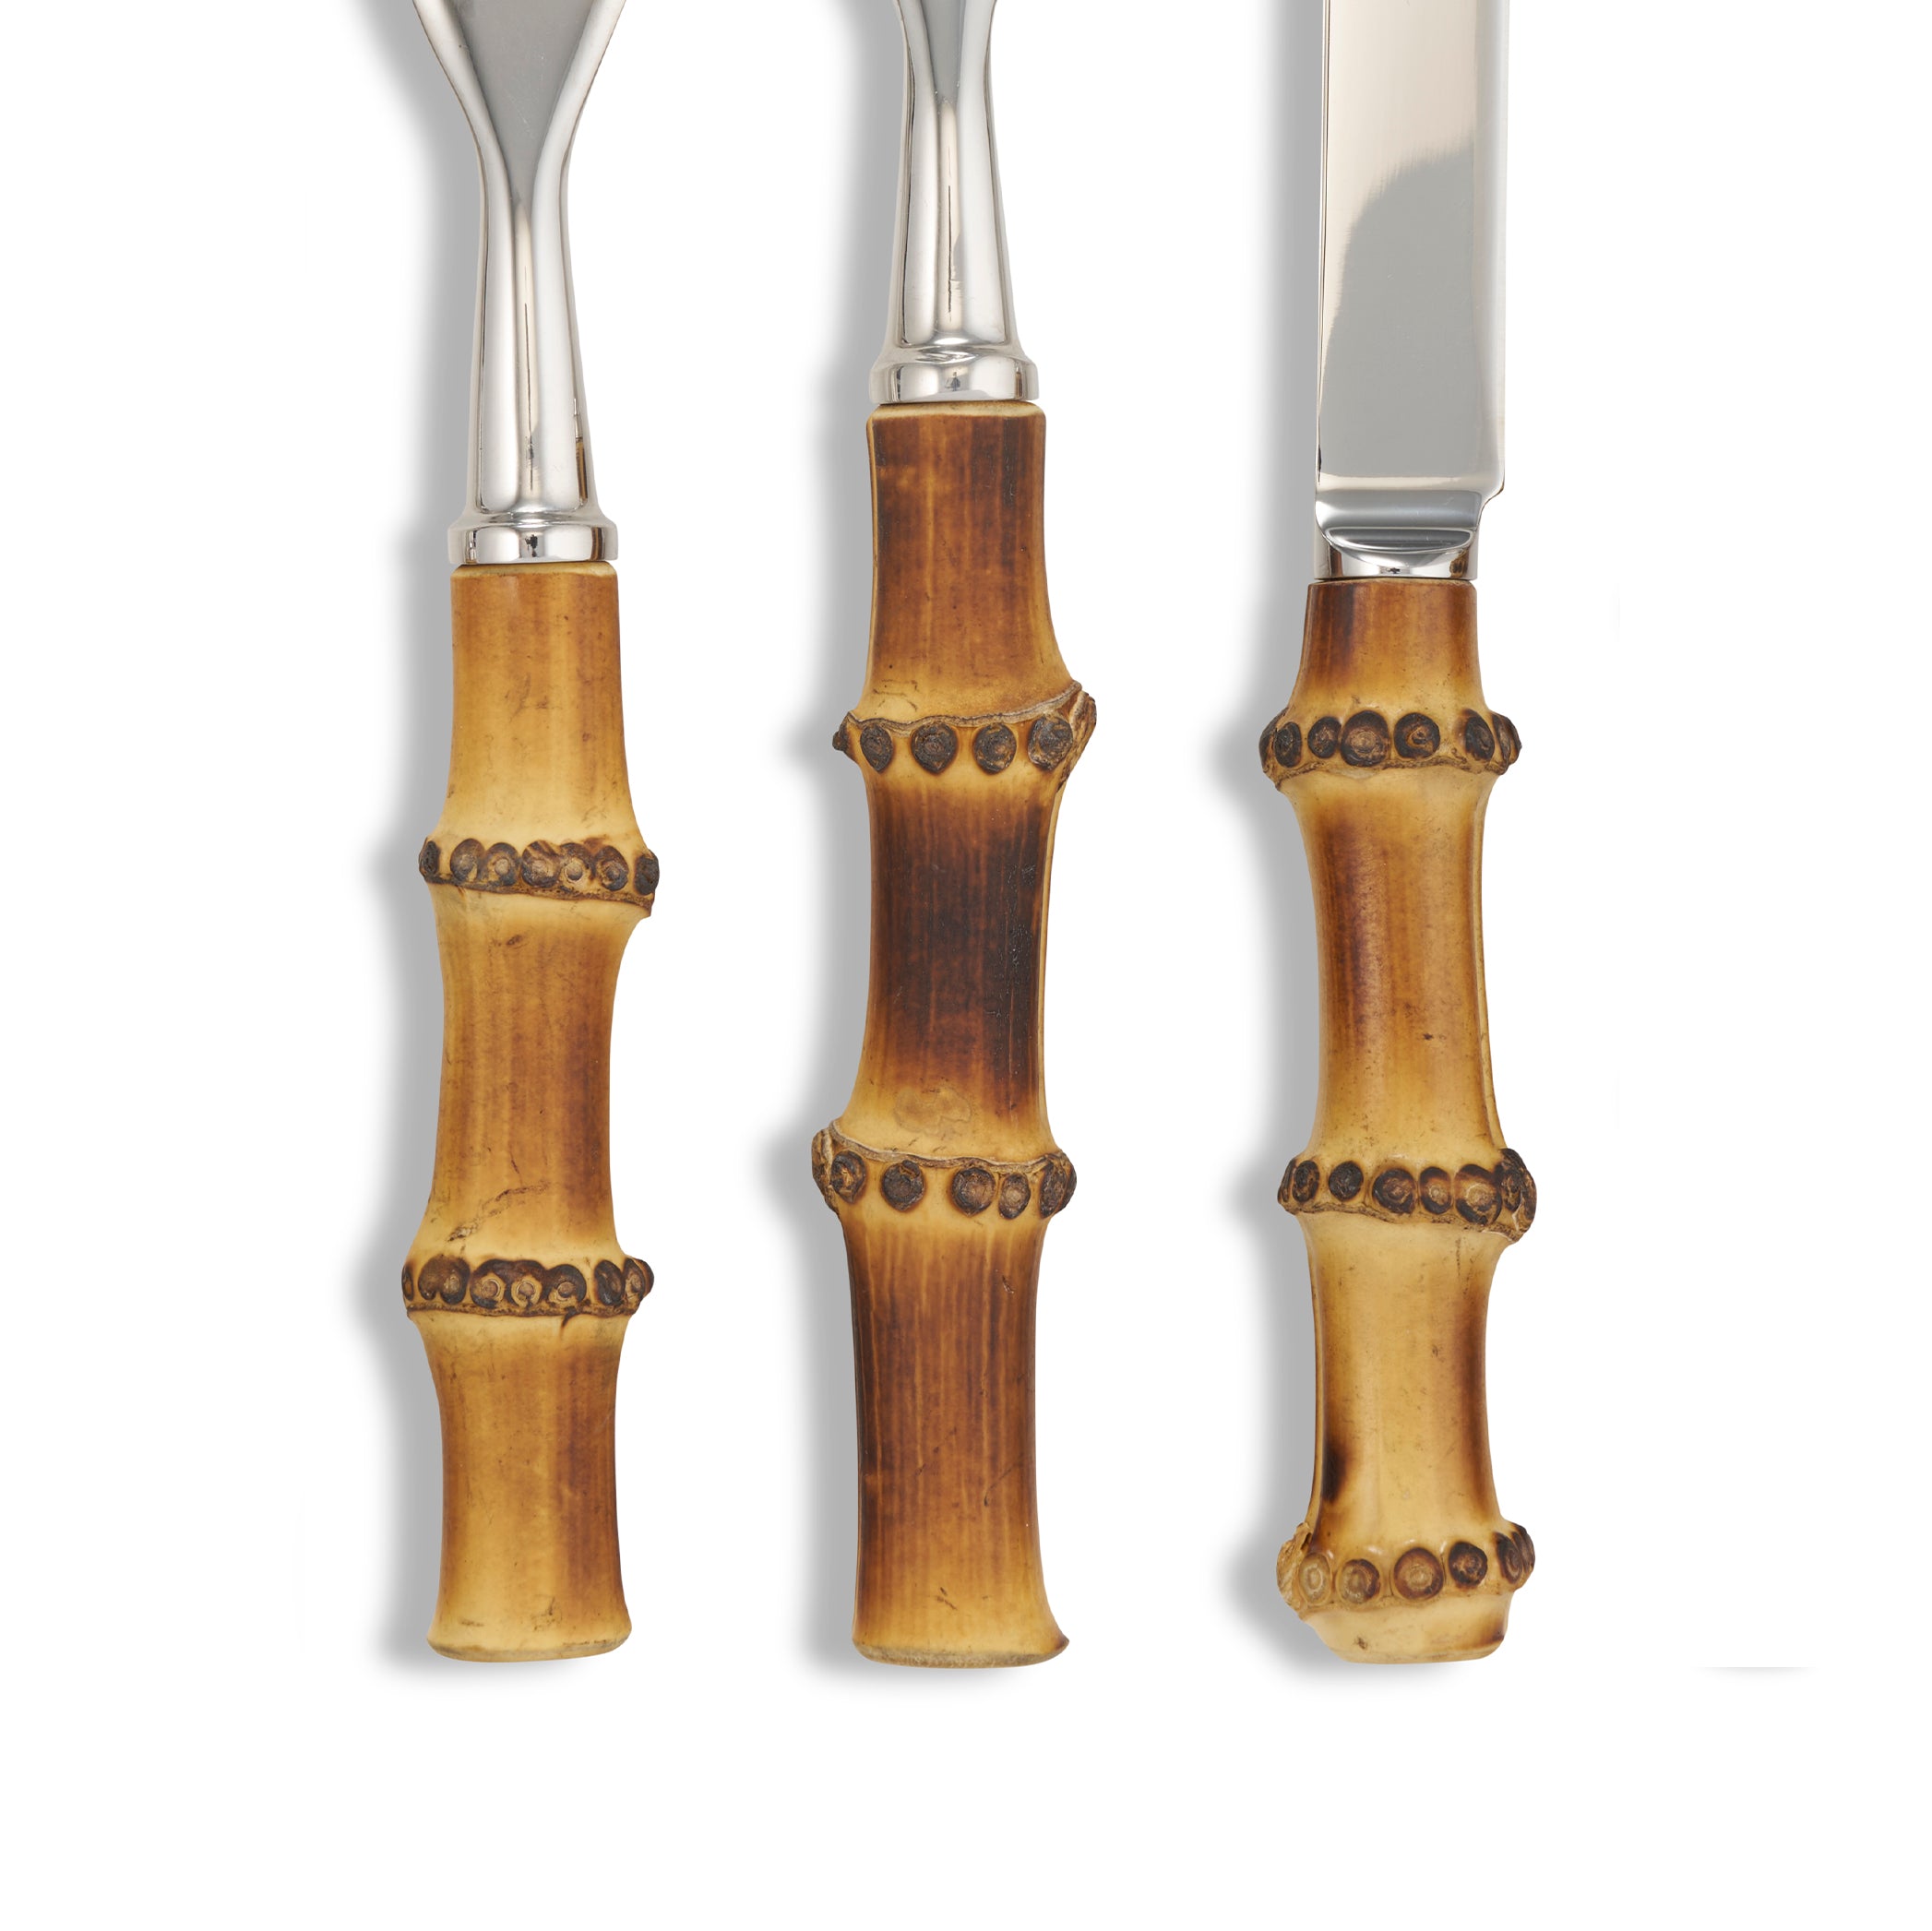 Julia Natural Bamboo & Stainless Steel 7 Piece Cutlery Set